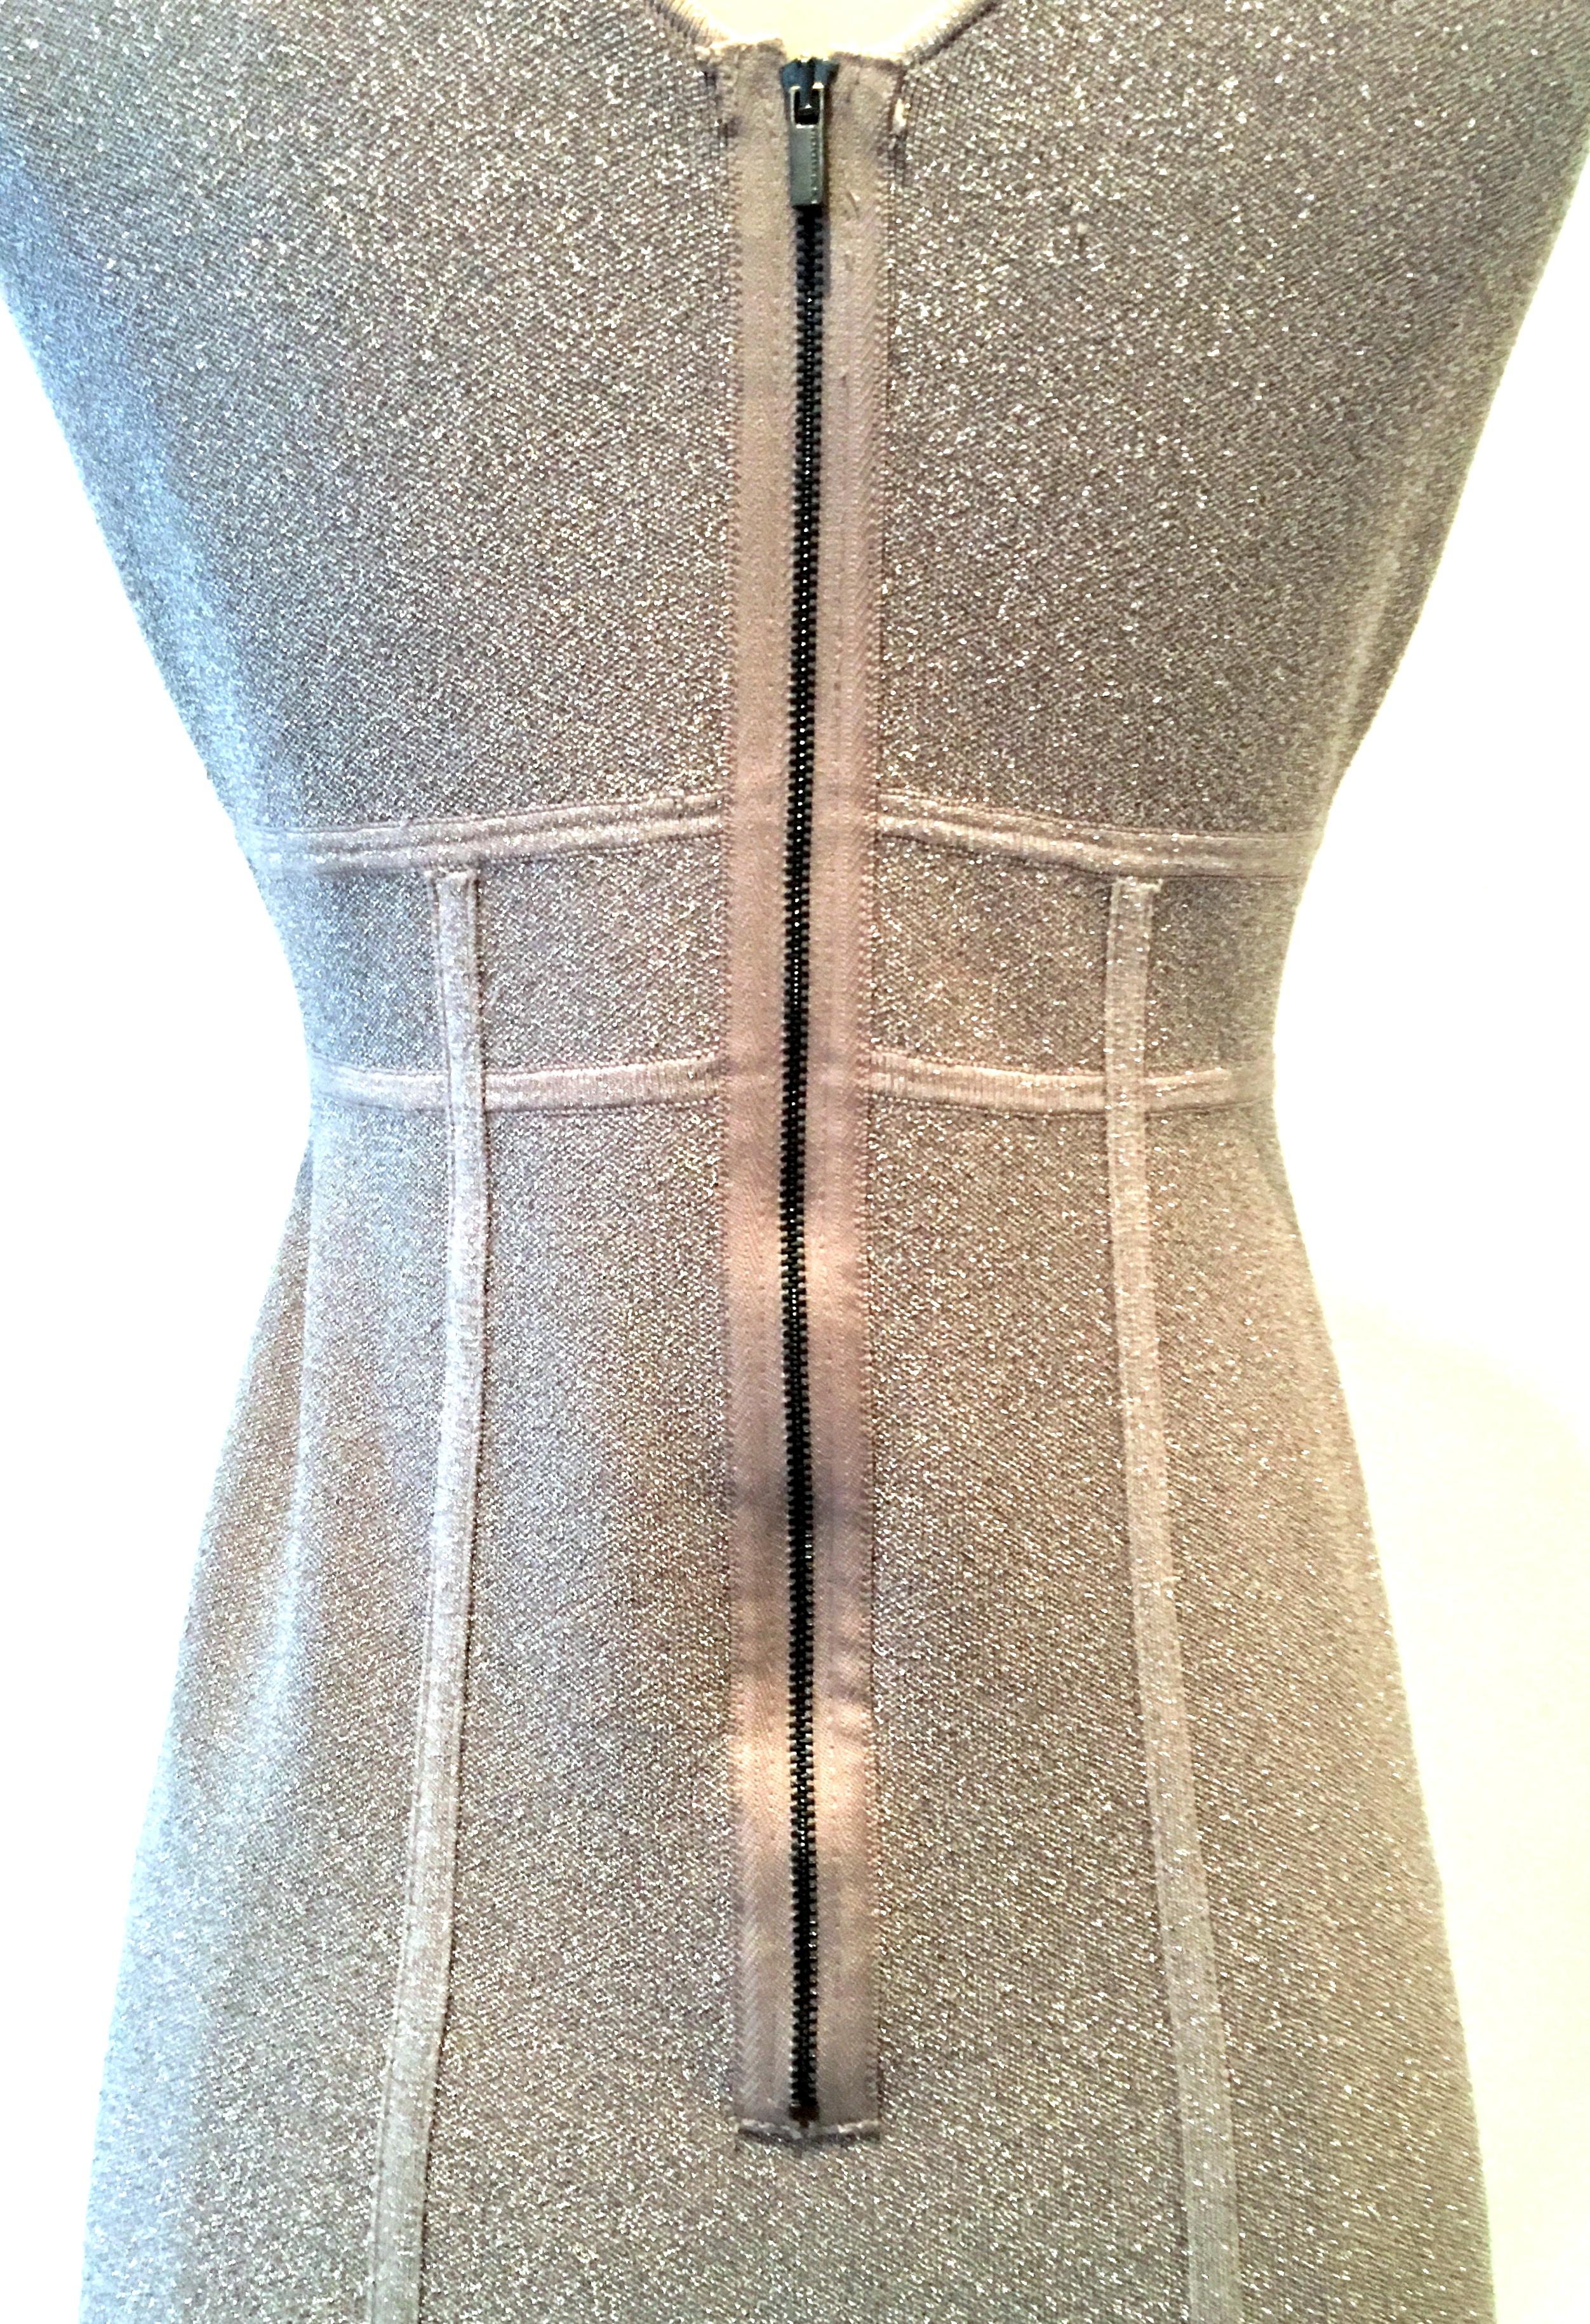 21st Century Herve Leger Style Metallic Cocktail Dress By Maxazria For BCBG  For Sale 2